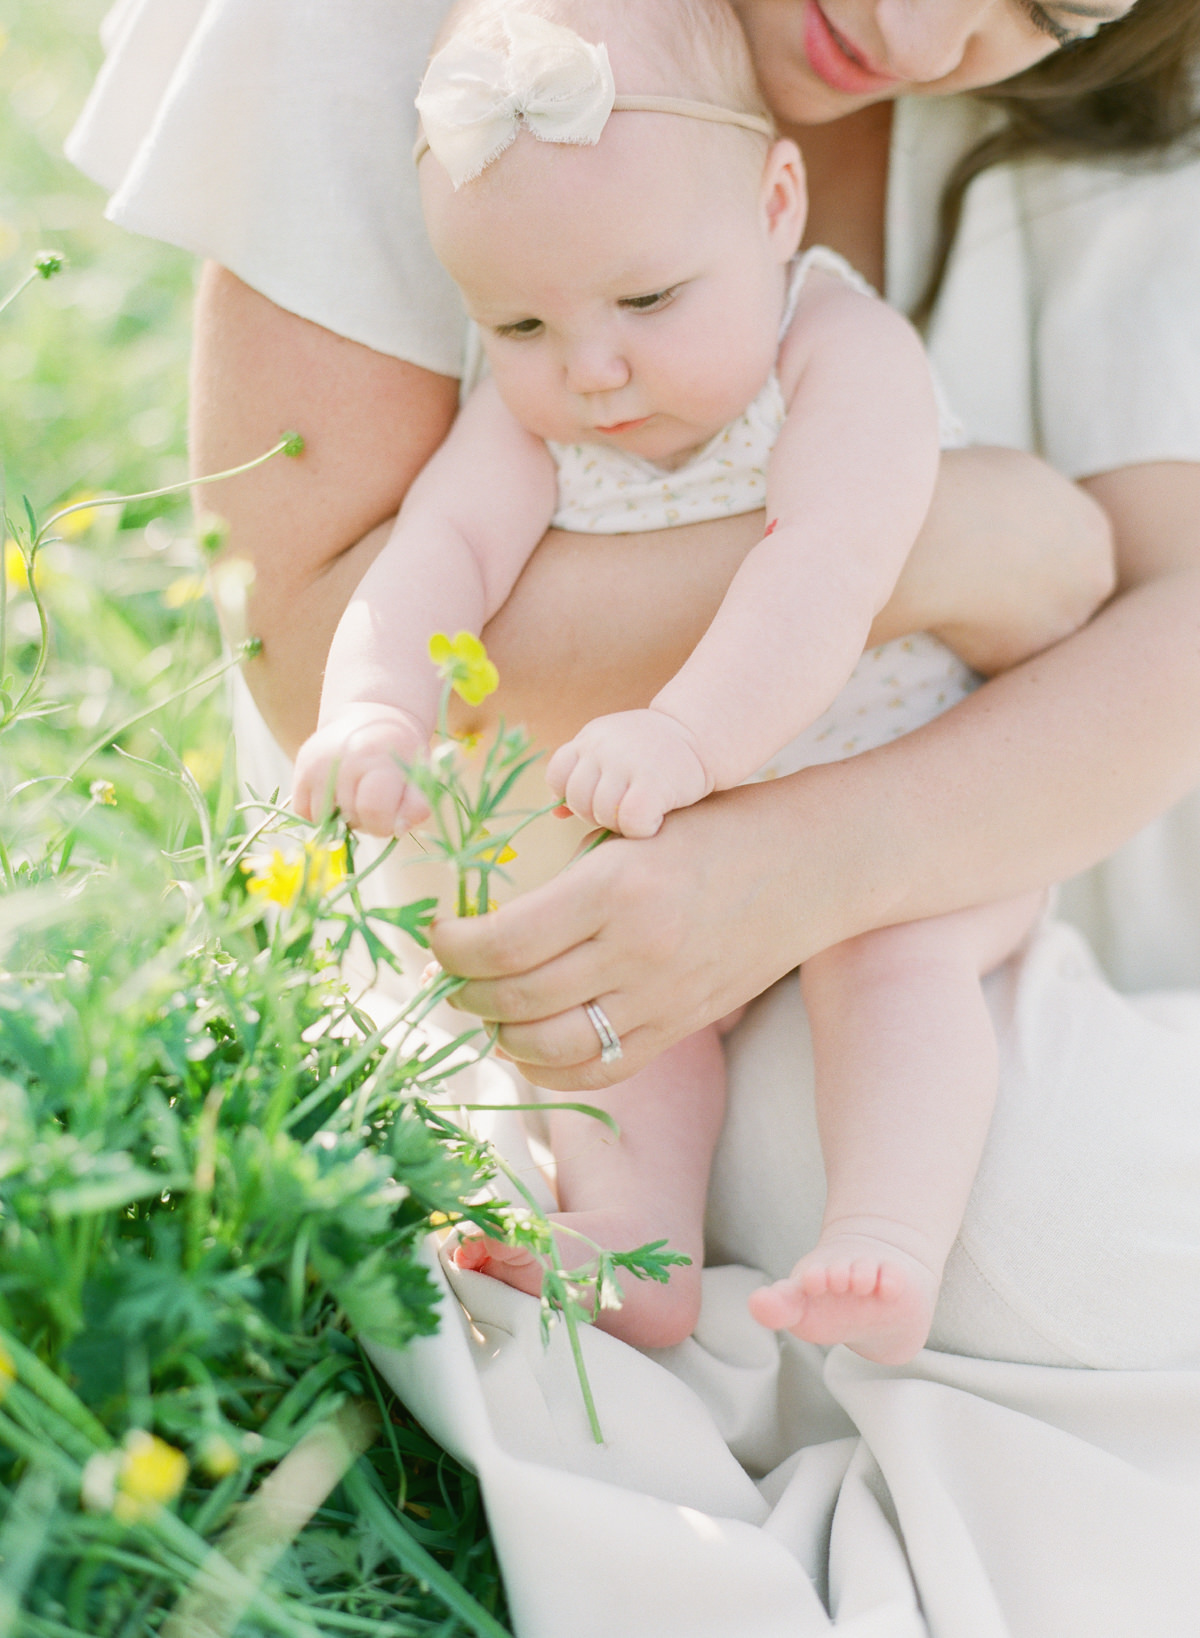 Kent-Avenue-Photography-Charlotte-Newborn-Photographers-On-Film-Mom-sitting-with-baby-reaching-for-flowers